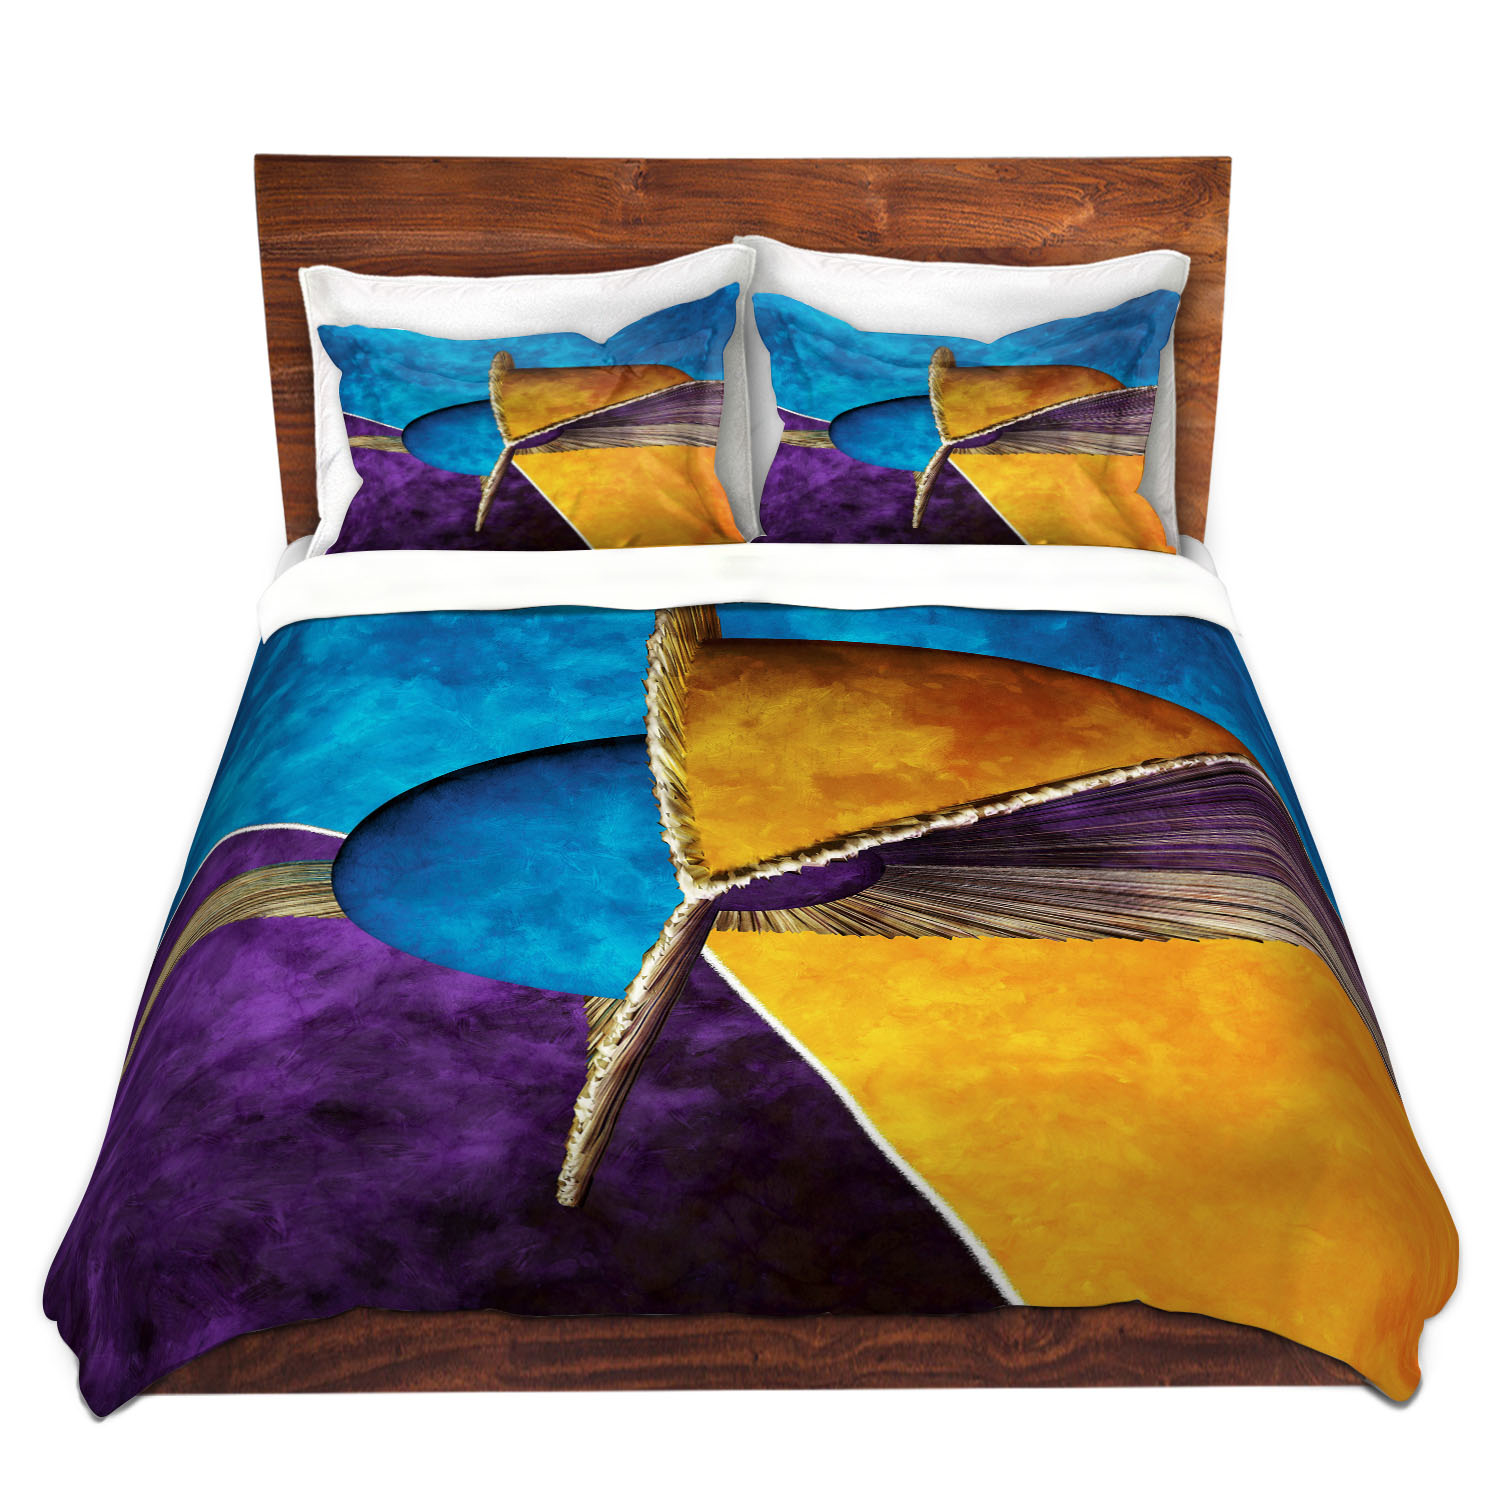 Dianoche Microfiber Duvet Covers By Angelina Vick - Abstract 23